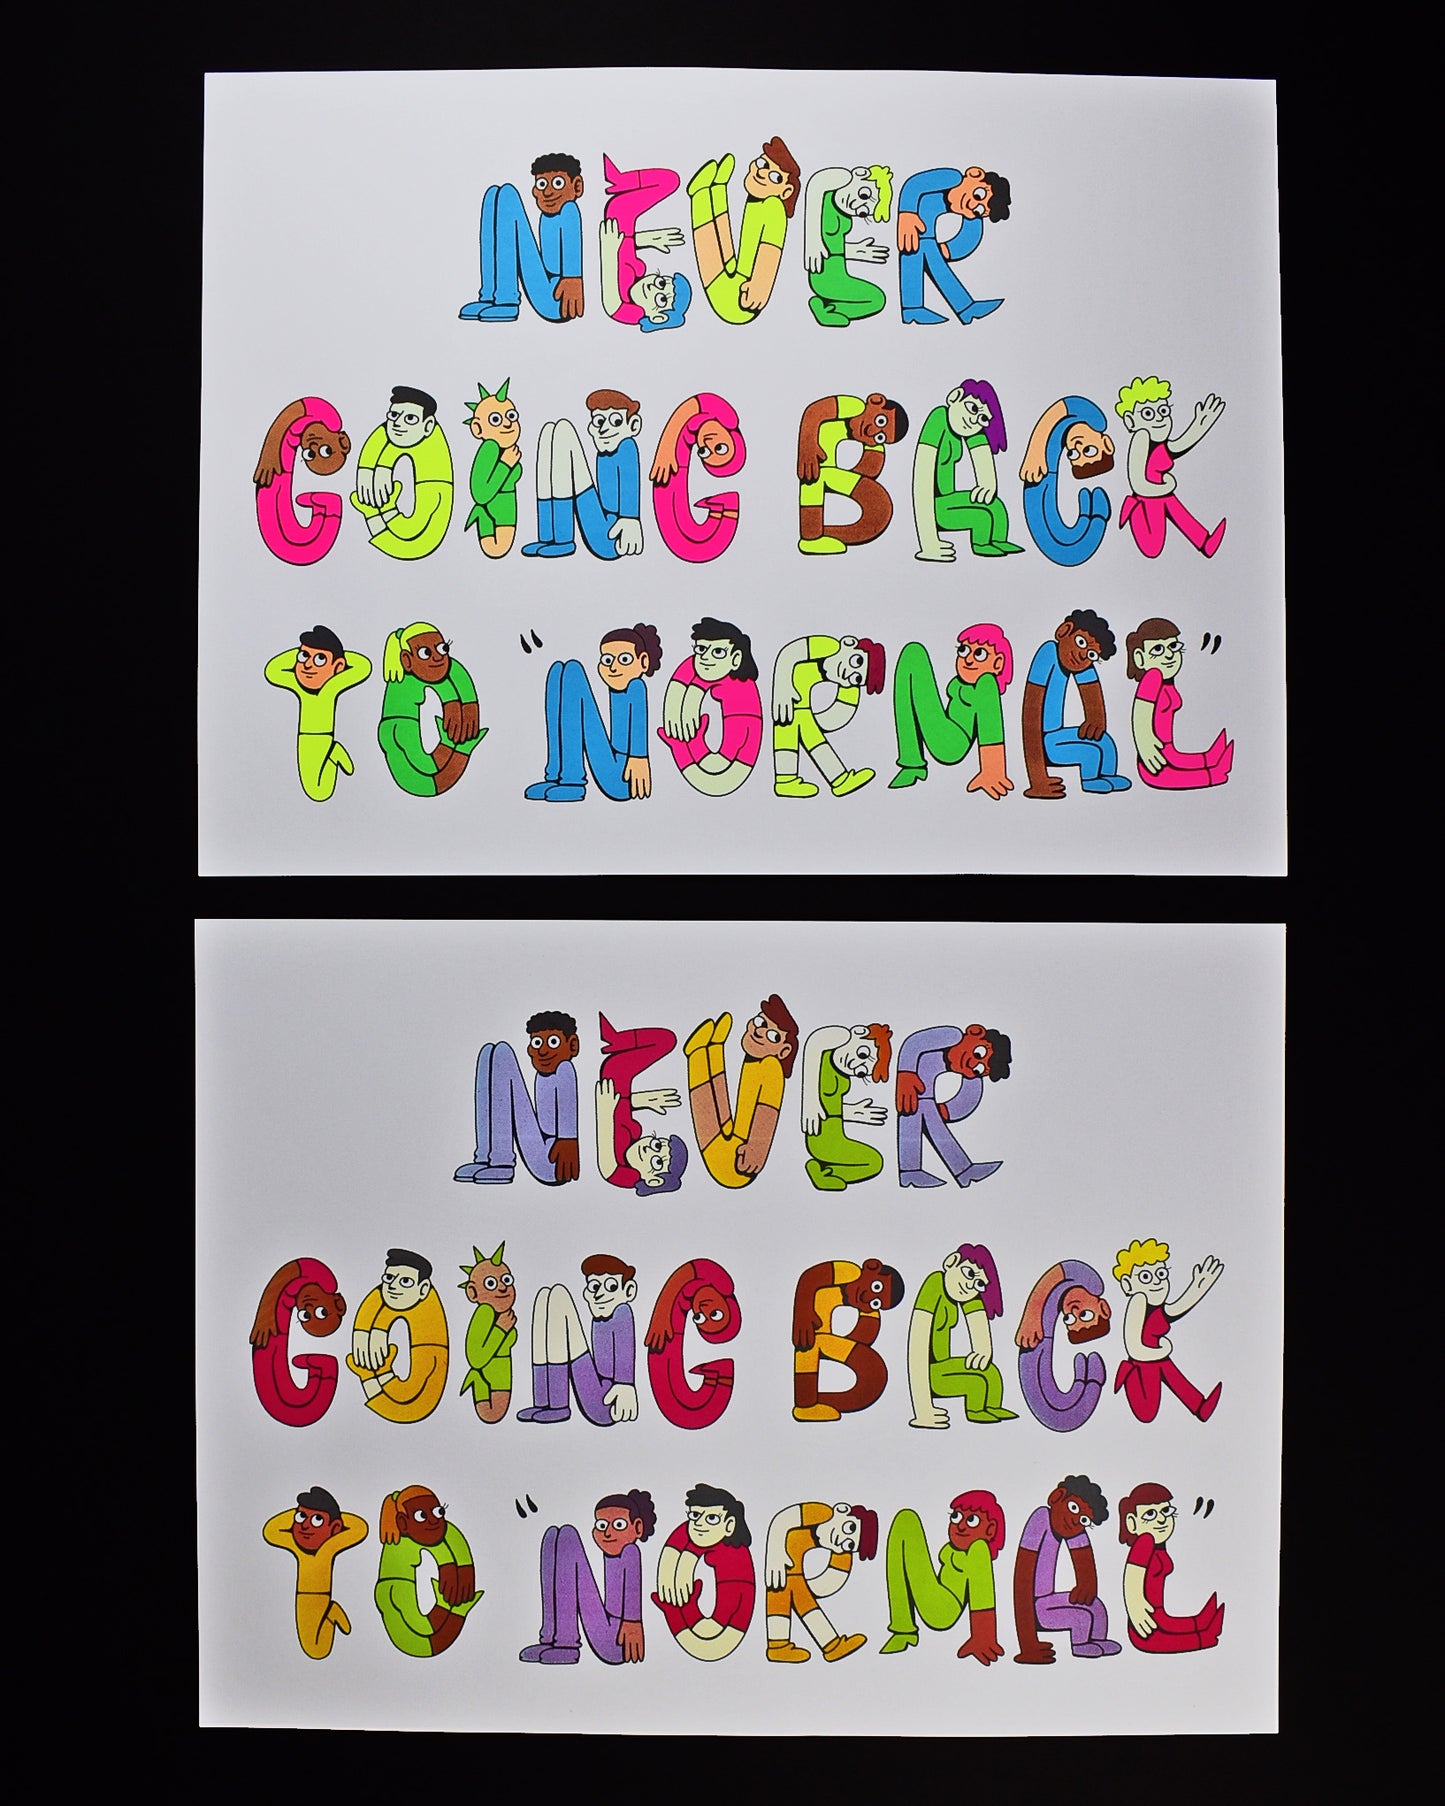 18x24 inch white poster that reads Never Going Back to Normal where the letters are a diversity of people all bending in the shape of letters. Each person/letter has a different neon tone (on the top poster) or jewel tone (on the bottom poster) color outfit of either yellow, pink yellow or green. All the outfits have varying styles. The word Normal is in quotation marks.